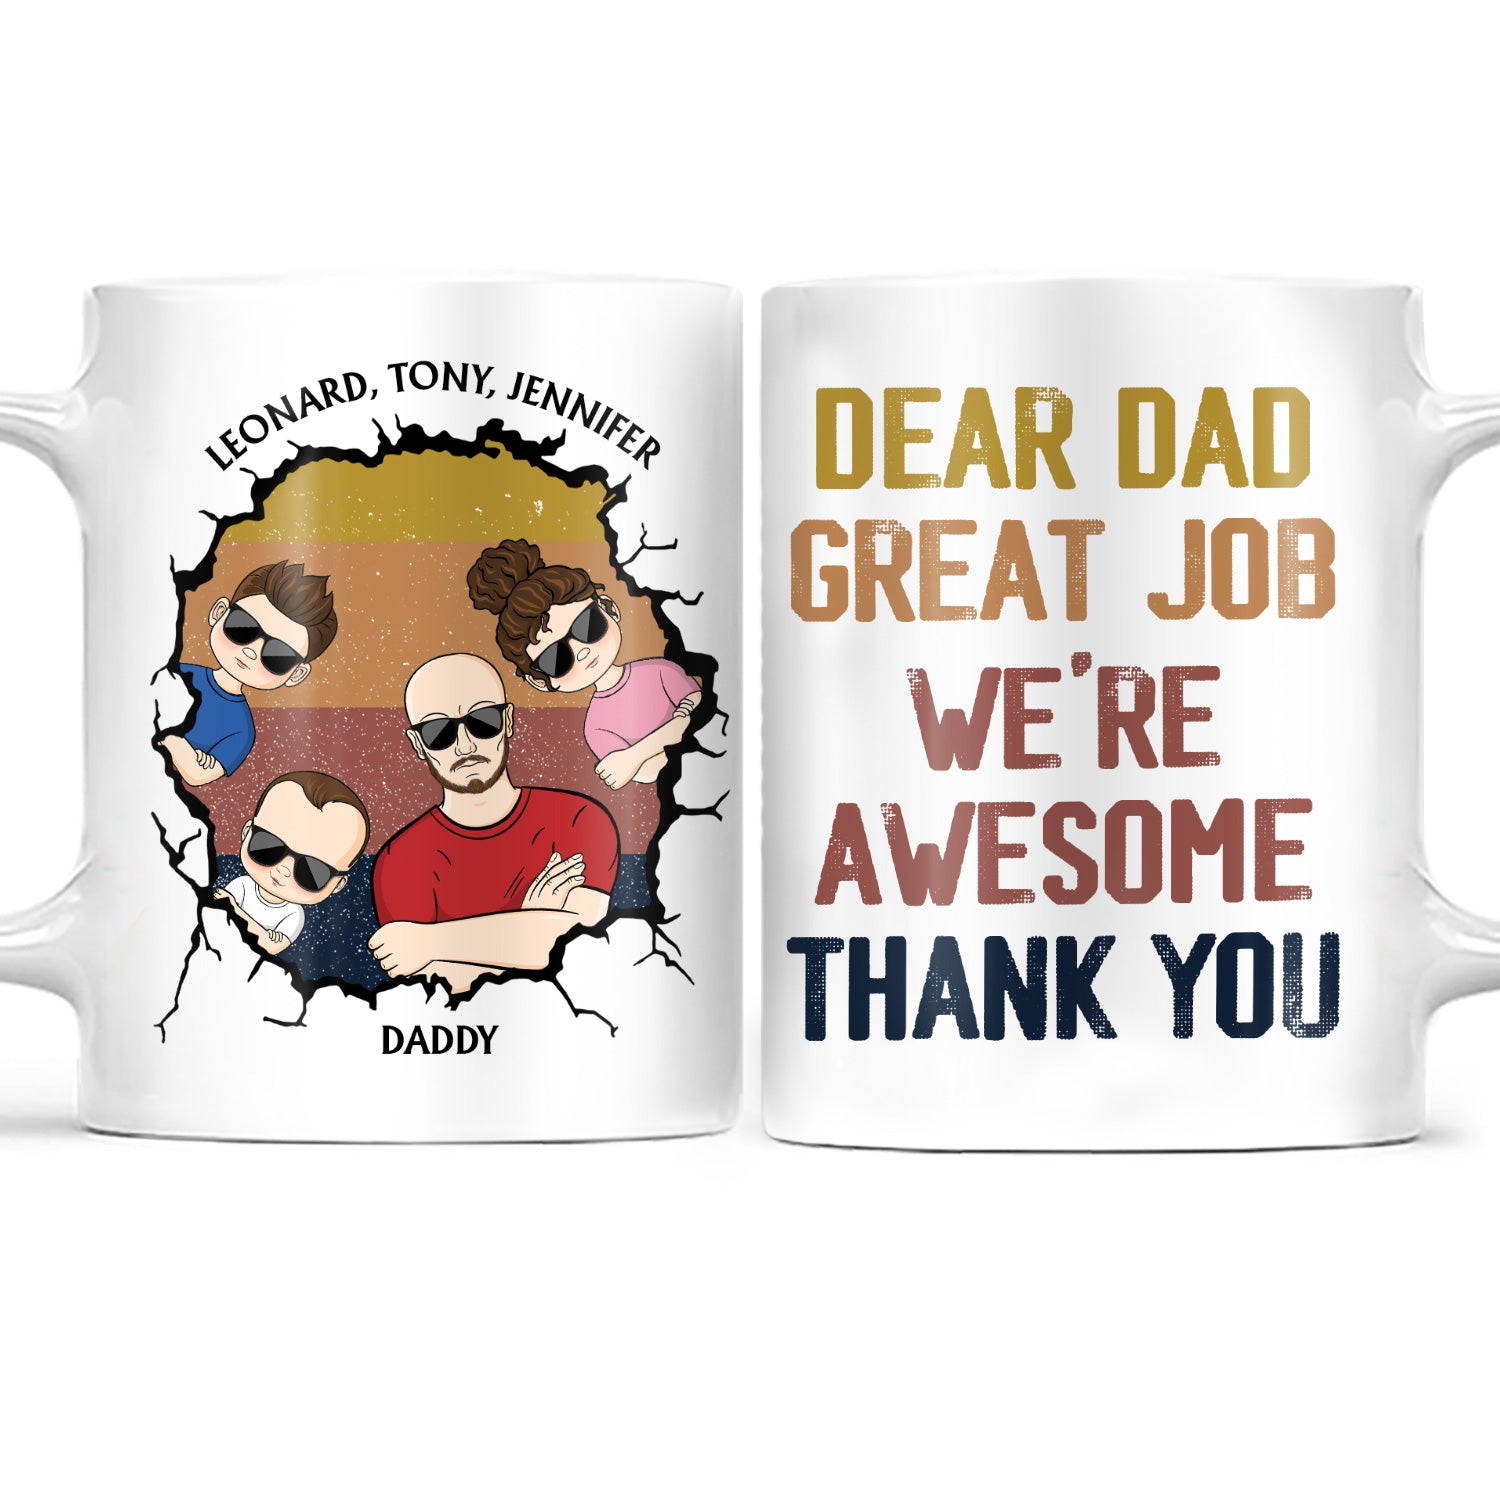 Dear Dad Great Job I'm Awesome Thank You Young - Birthday, Loving Gift For Dad, Father, Grandpa, Grandfather - Personalized Custom White Edge-to-Edge Mug